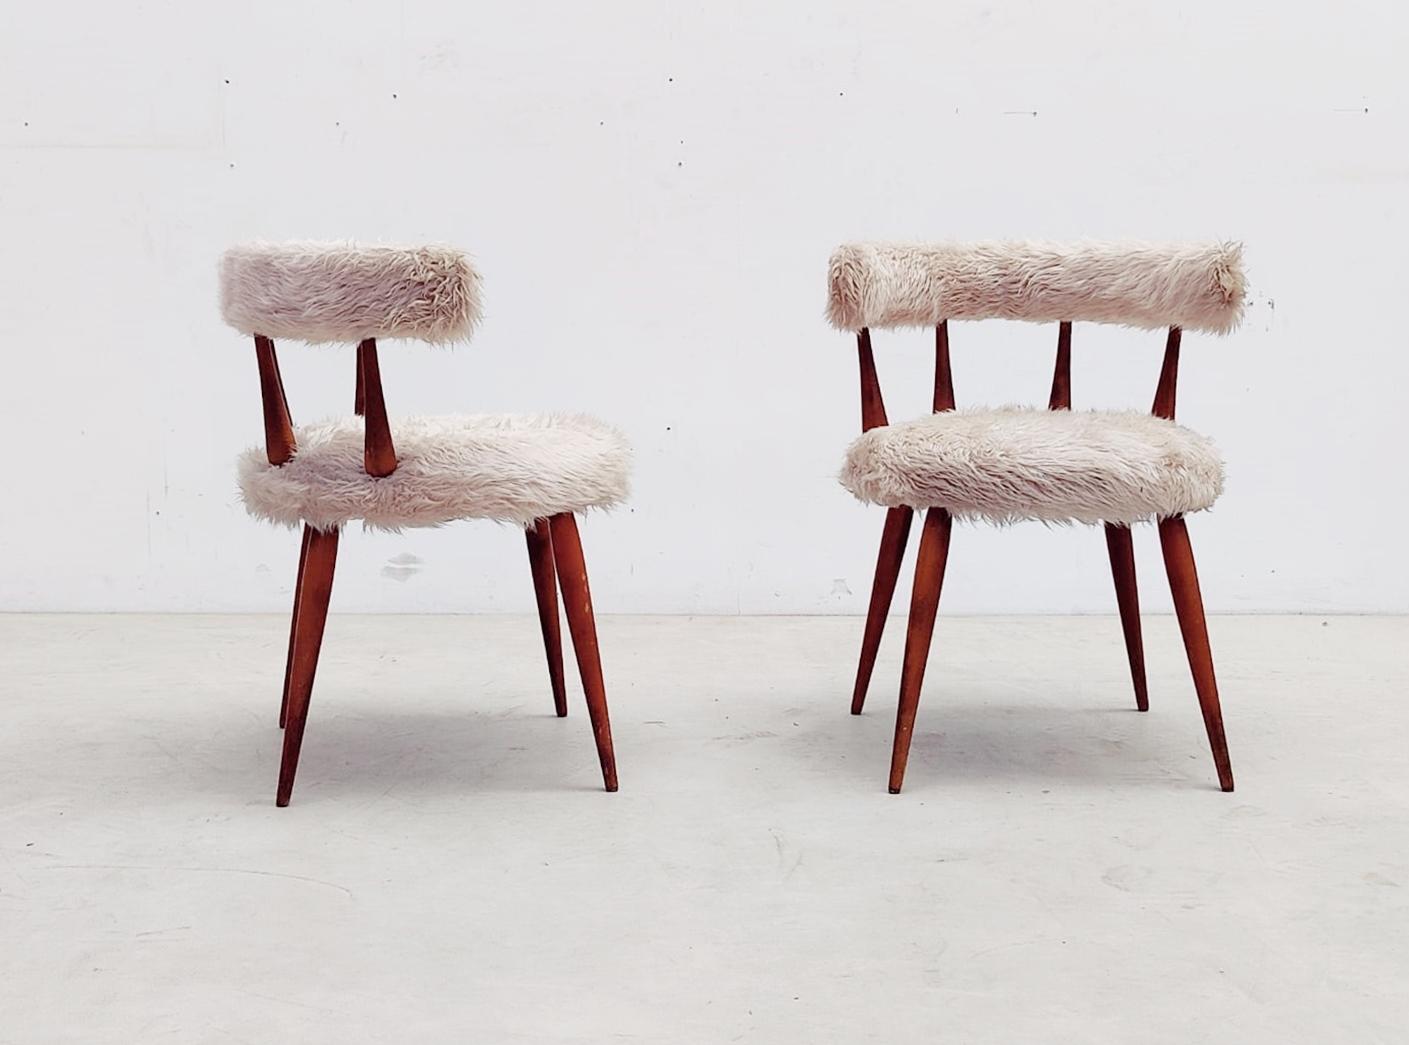 Pair of mid-century scandinavian cocktail chairs - 1950s.